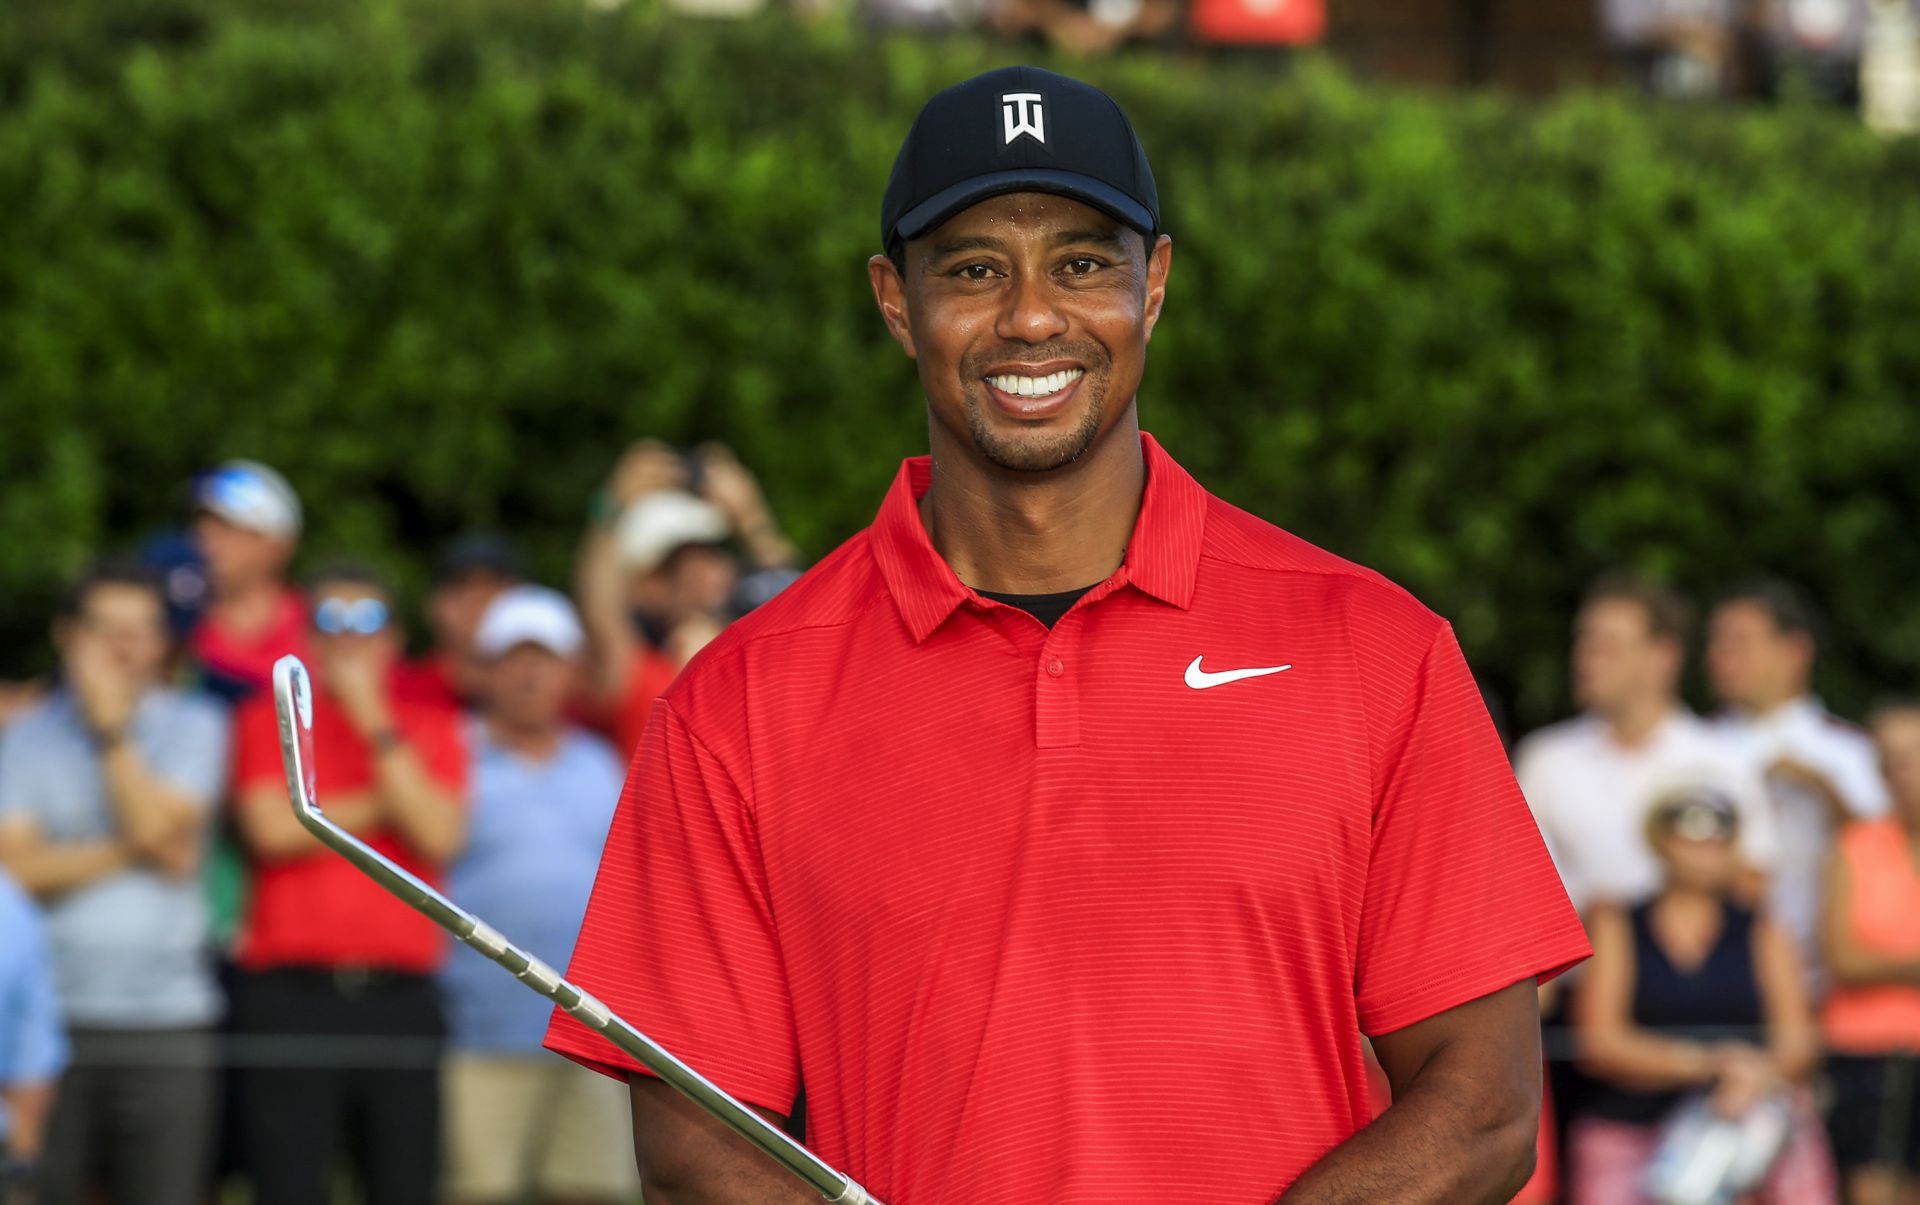 epa07042482 Tiger Woods of the US smiles as he poses with the Tour Championship trophy, a sterling silver putter, after the fourth round of the Tour Championship golf tournament and the FedEx Cup final at Eastlake Golf Club in Atlanta, Georgia, USA, 23 September 2018. Tiger Woods won the Tour Championship and Justin Rose of England won the FedEx Cup.  EPA/TANNEN MAURY